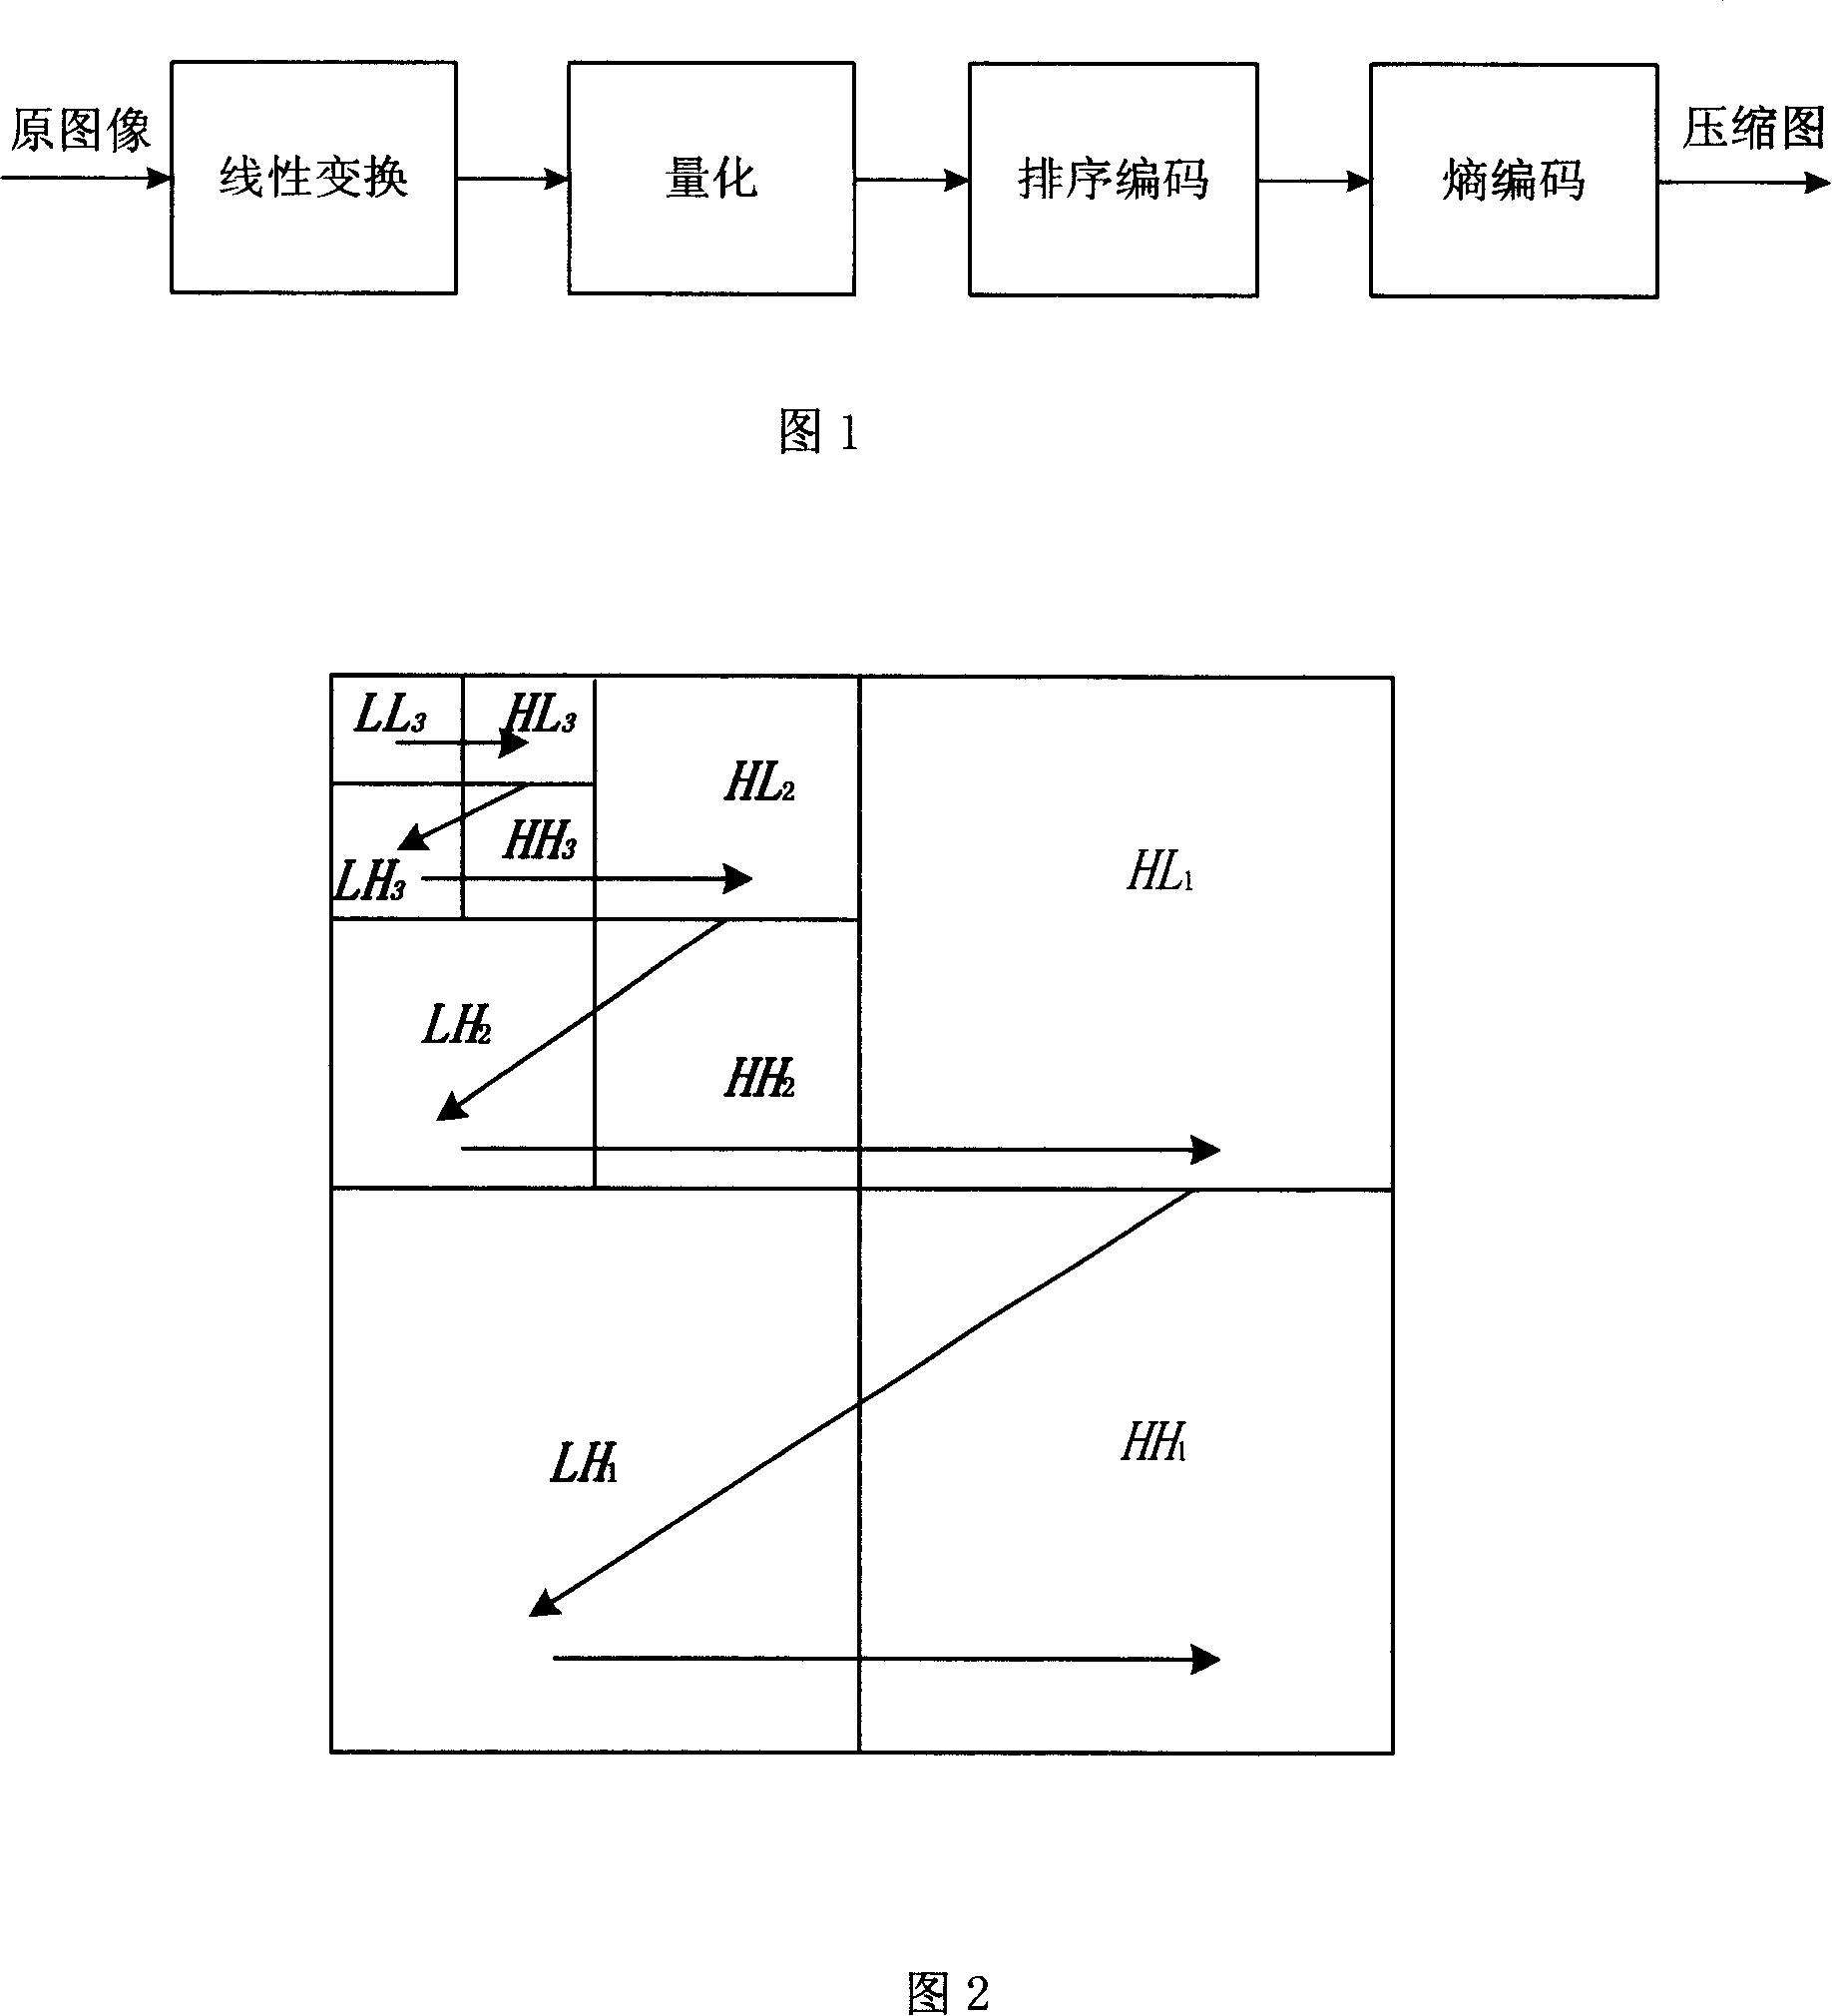 Method for implementing built-in image compression based on run-length coding